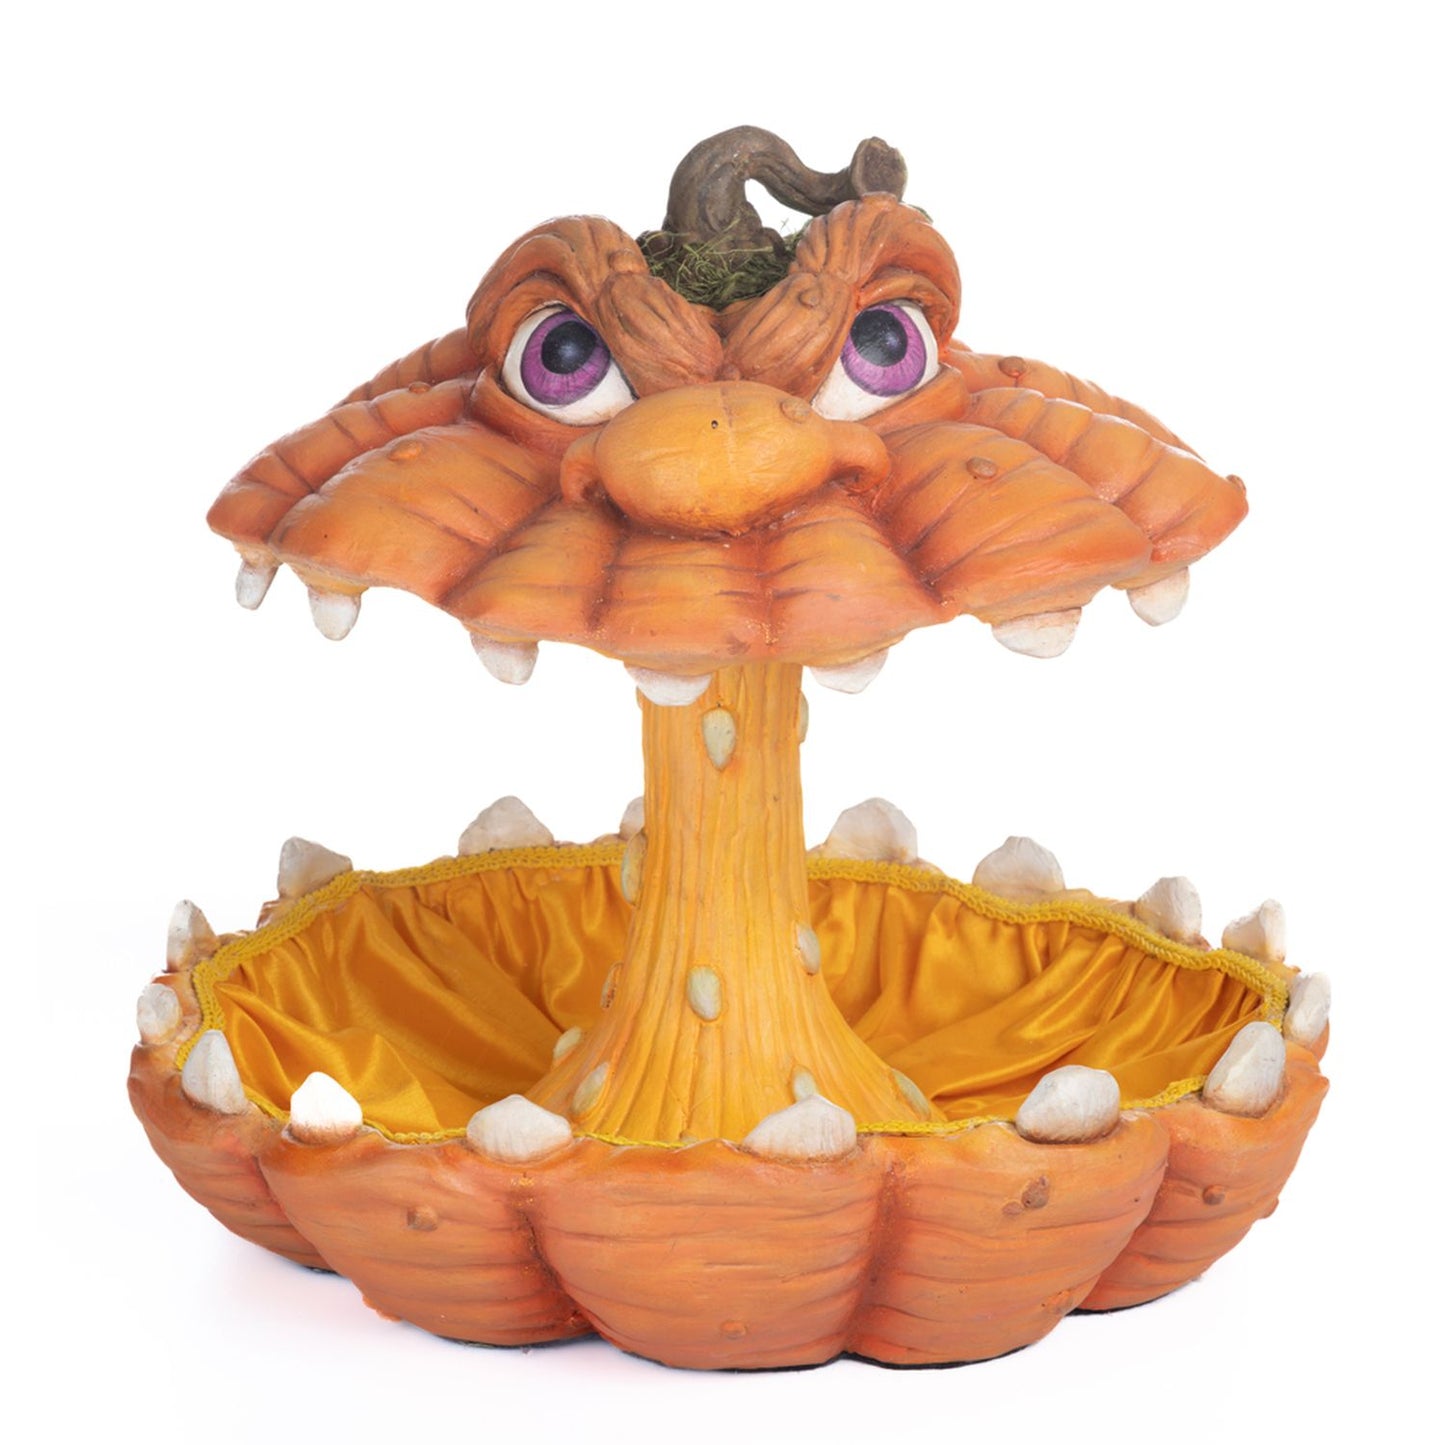 Katherine's Collection 12.5" Oh My Gourd Halloween Pumpkin Candy Bowl, Orange Resin